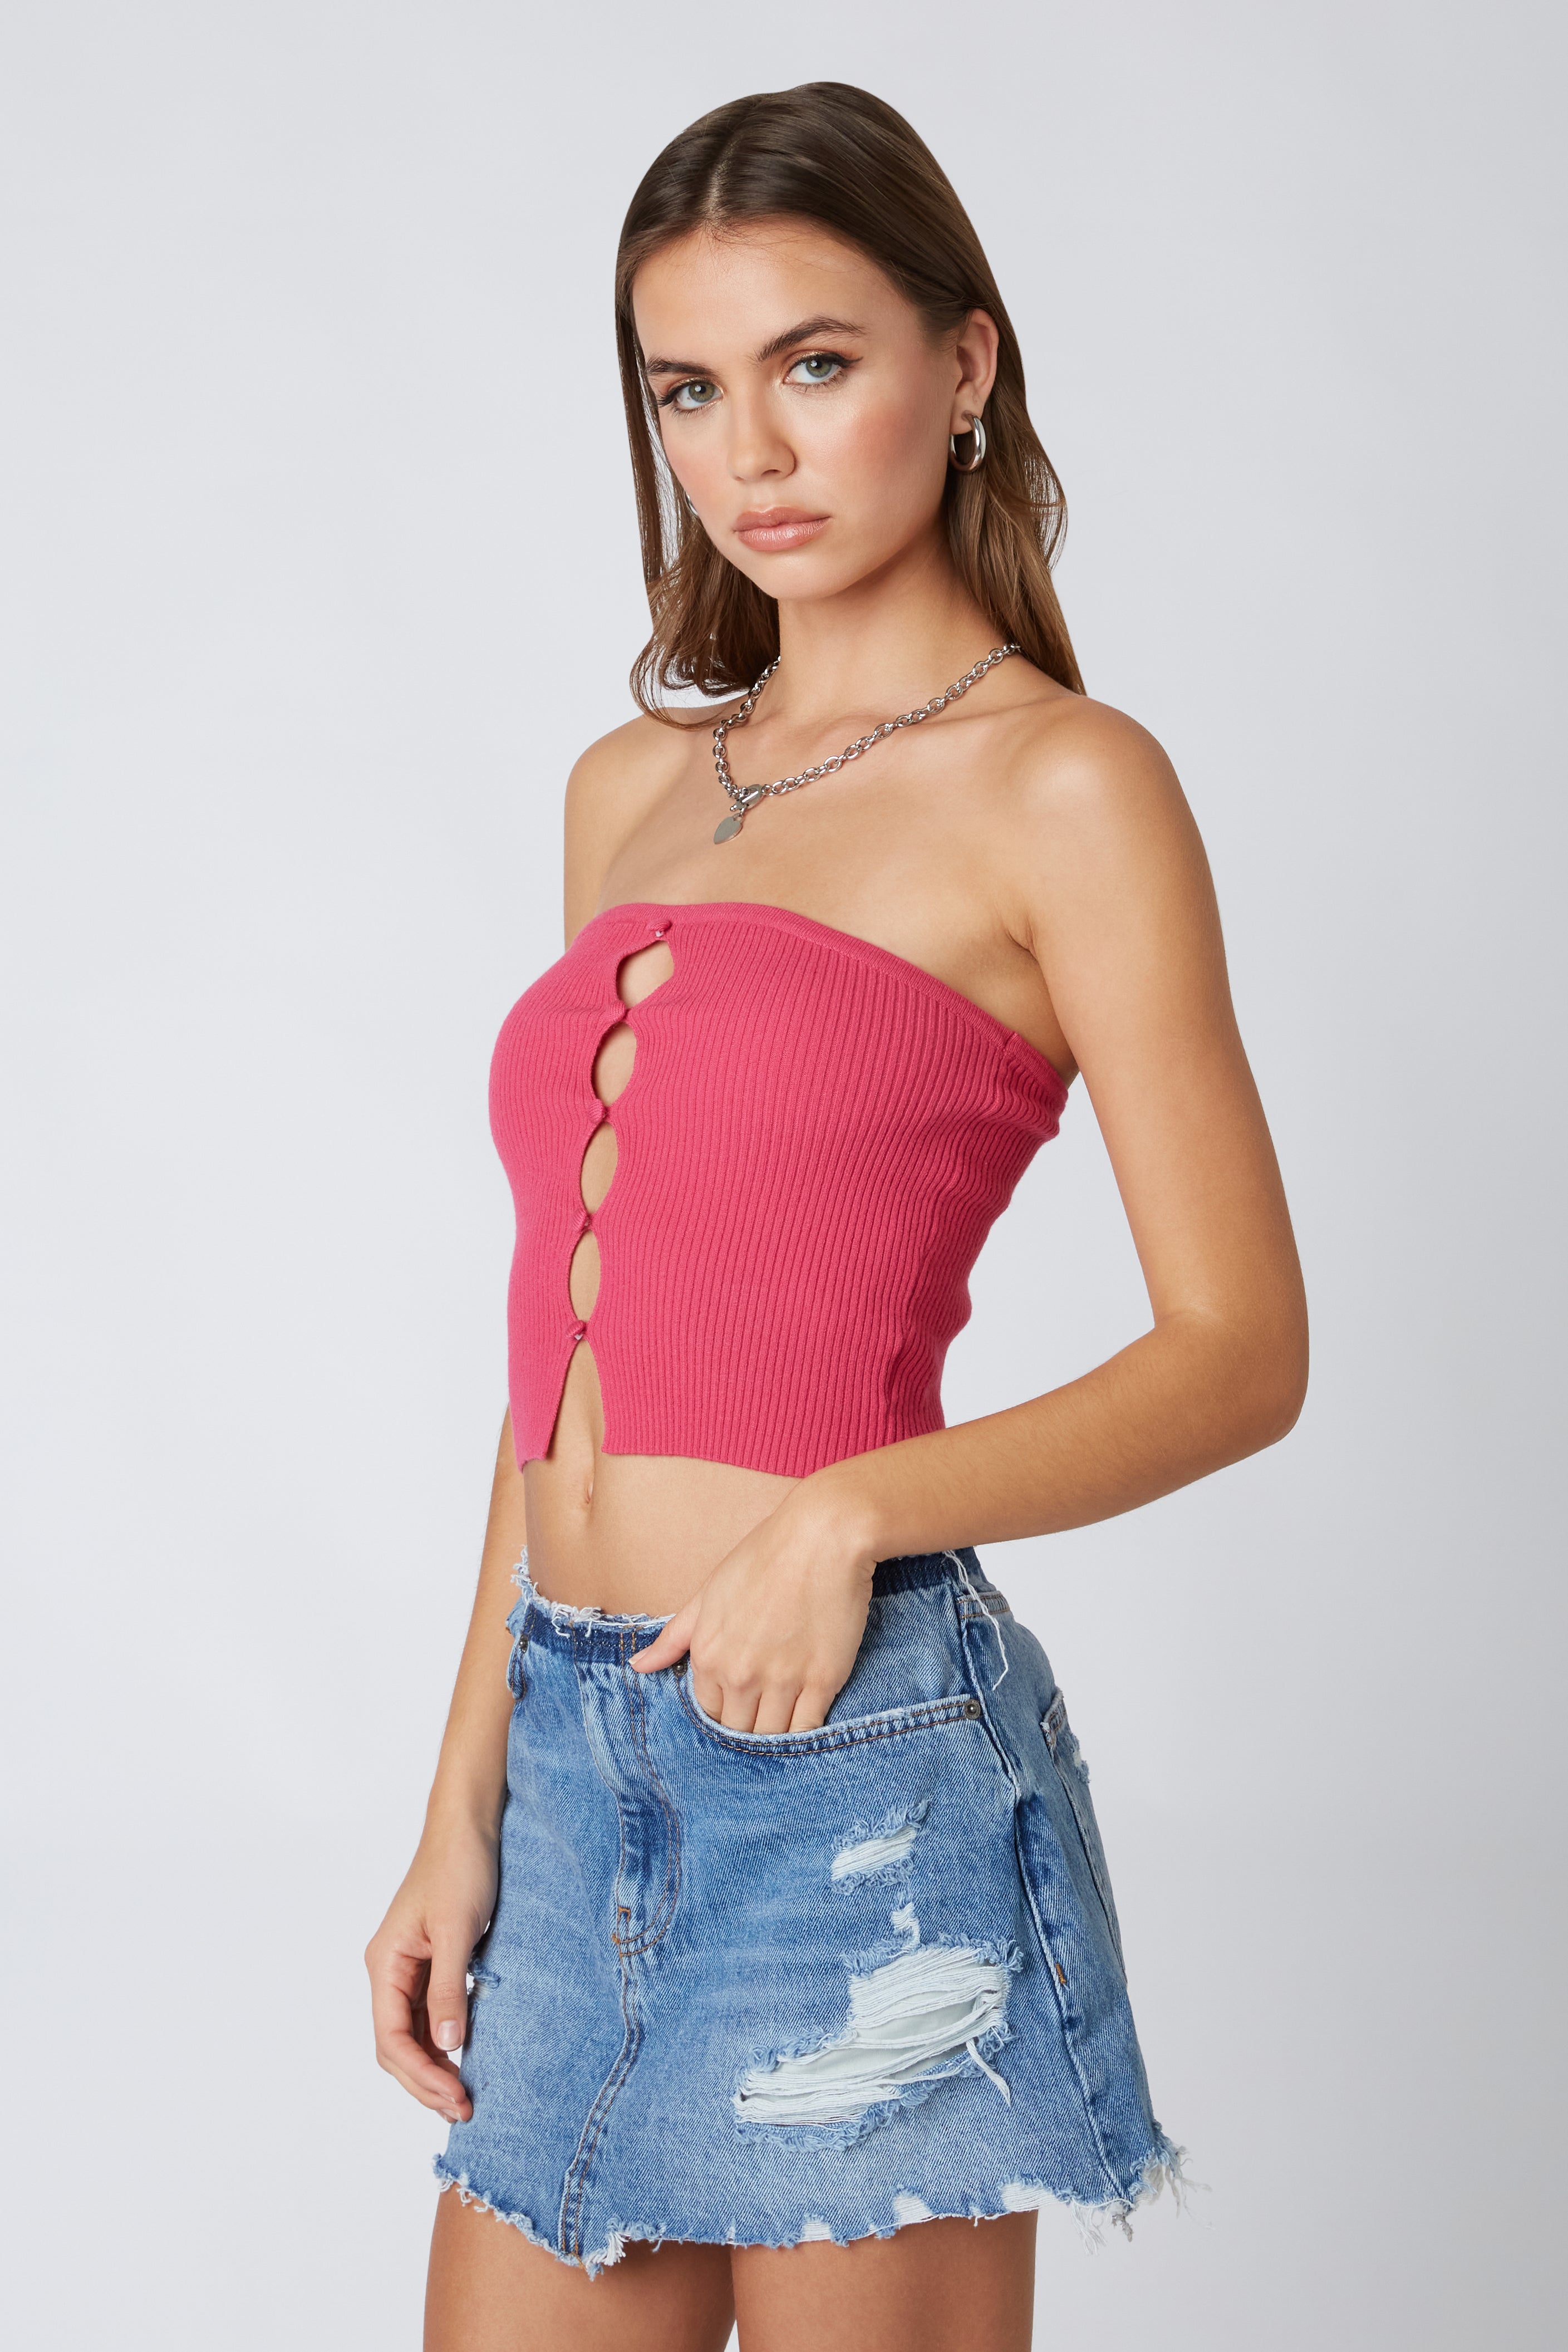 Keyhole Knit Tube Top in Hot Pink Side